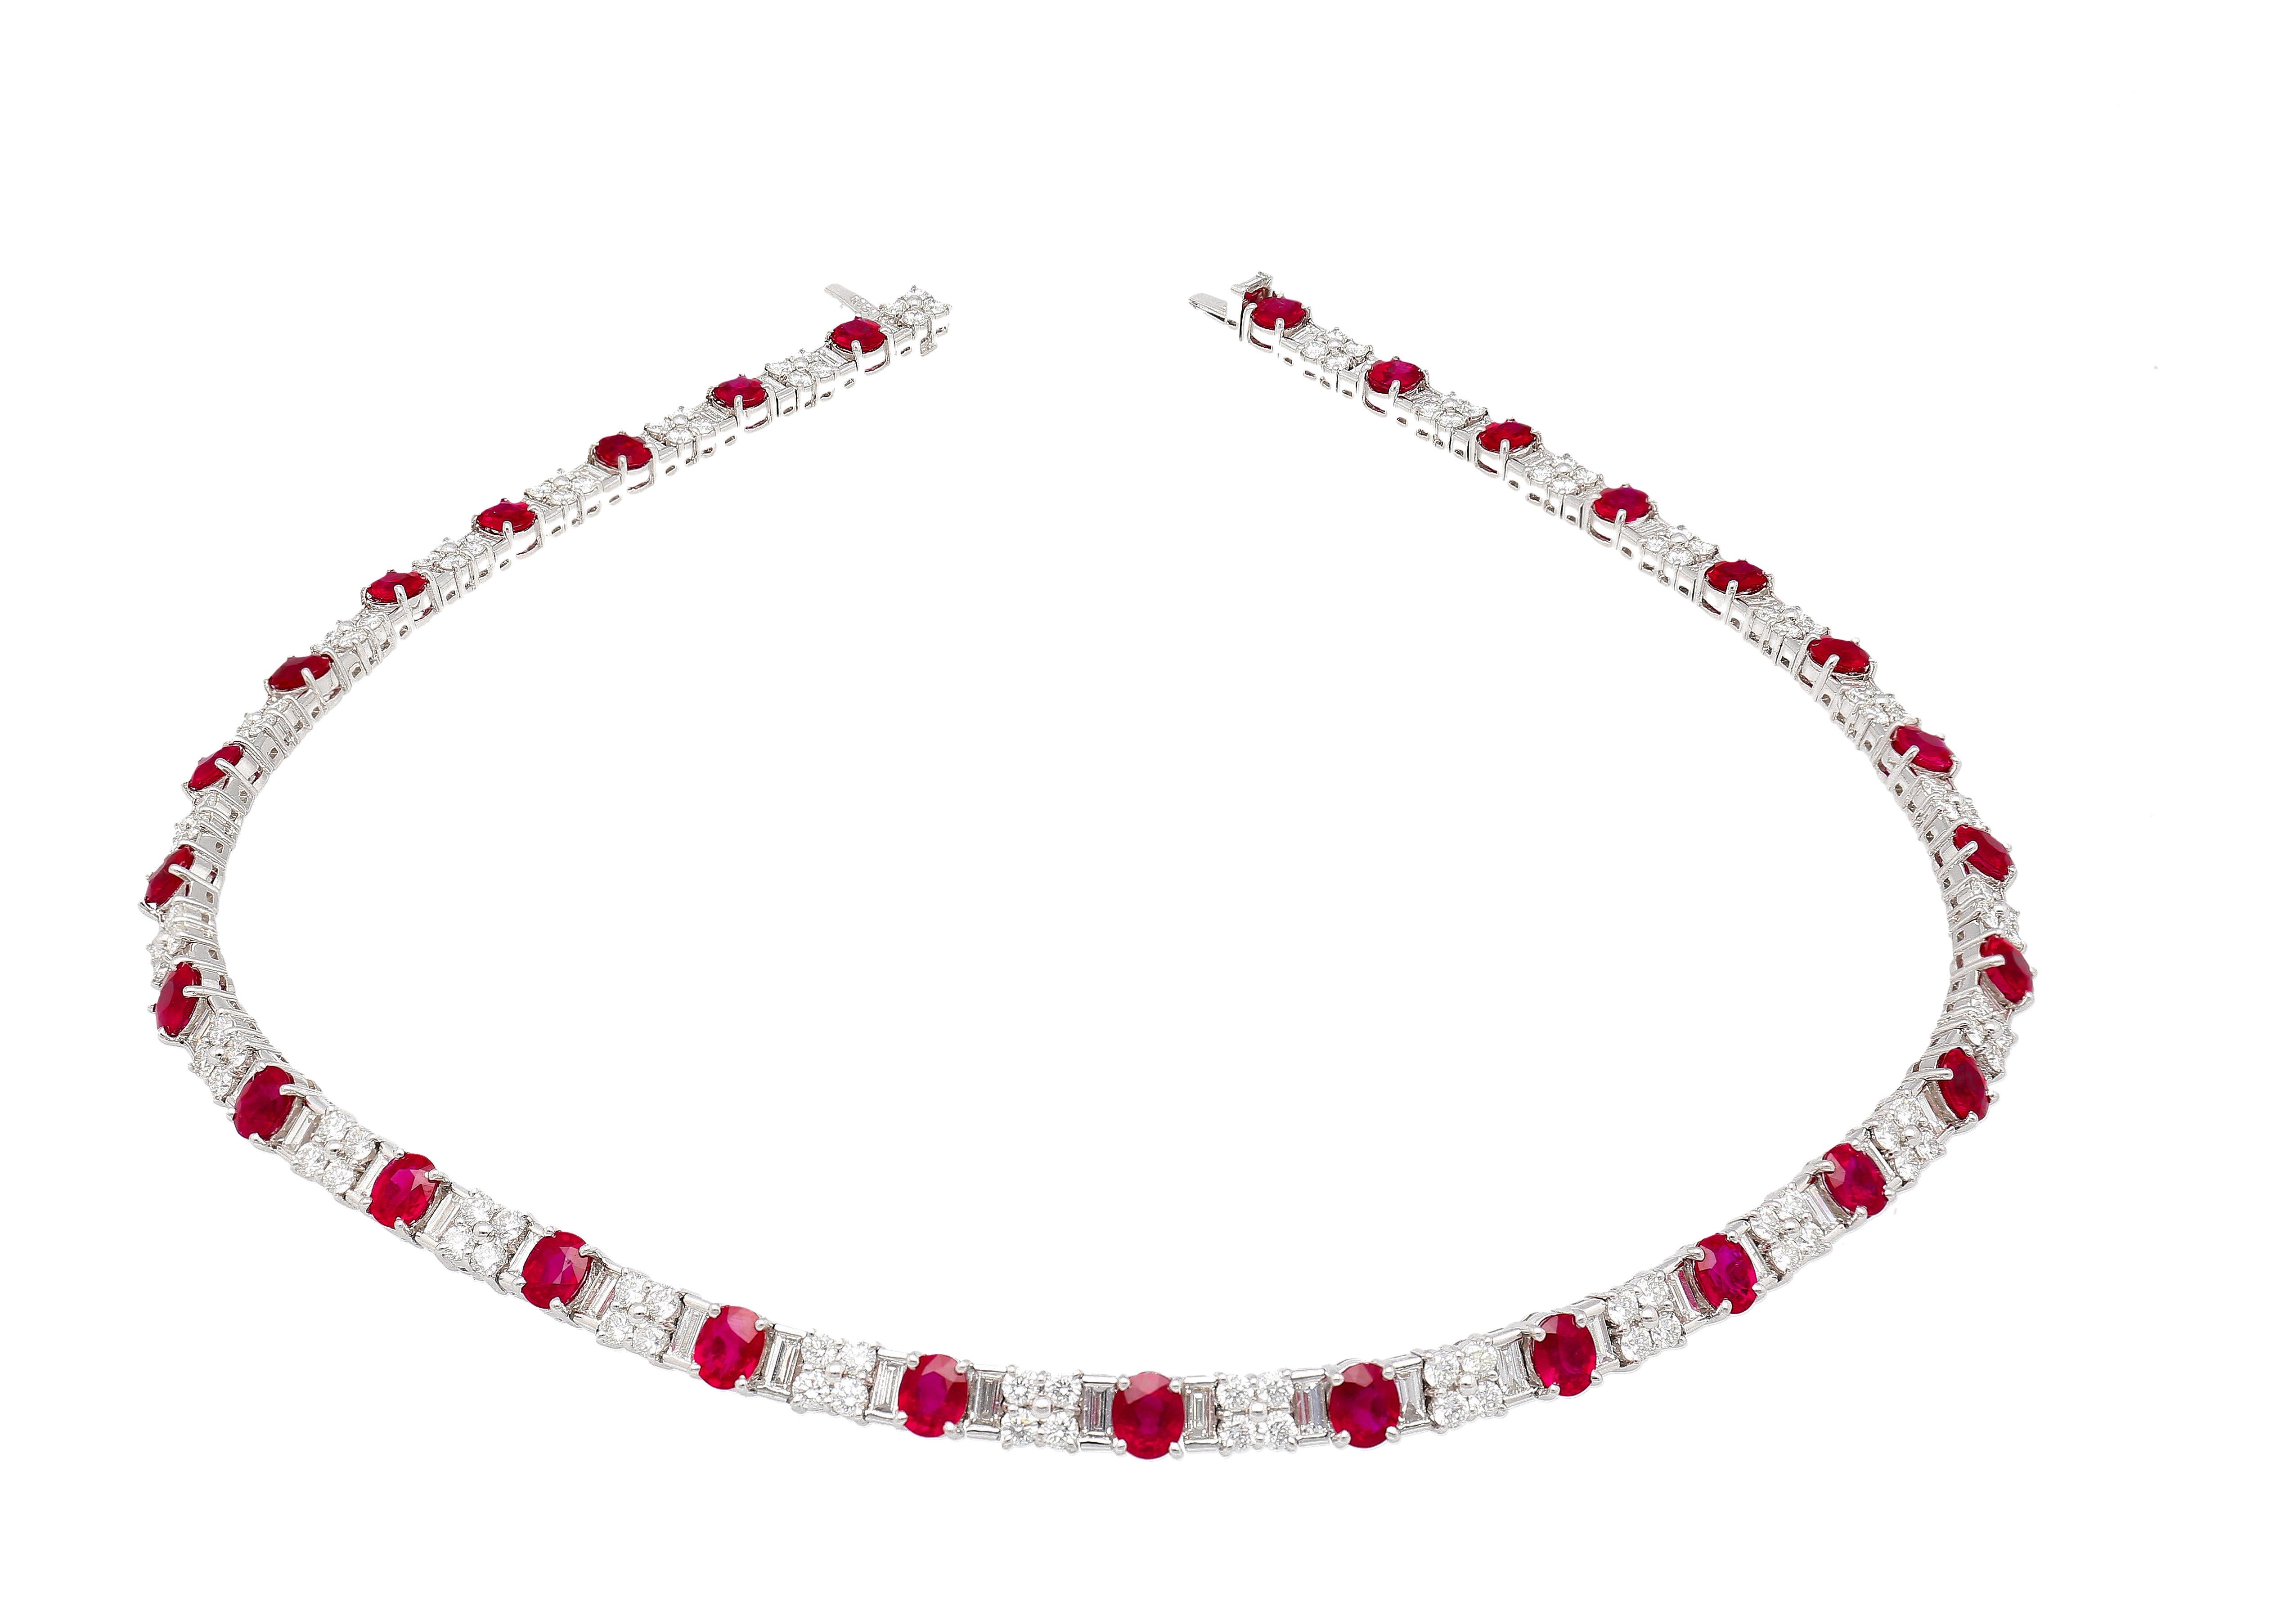 30 Carat Oval Cut Ruby & Mixed Cut Diamond Tennis Necklace in Platinum In New Condition For Sale In Miami, FL